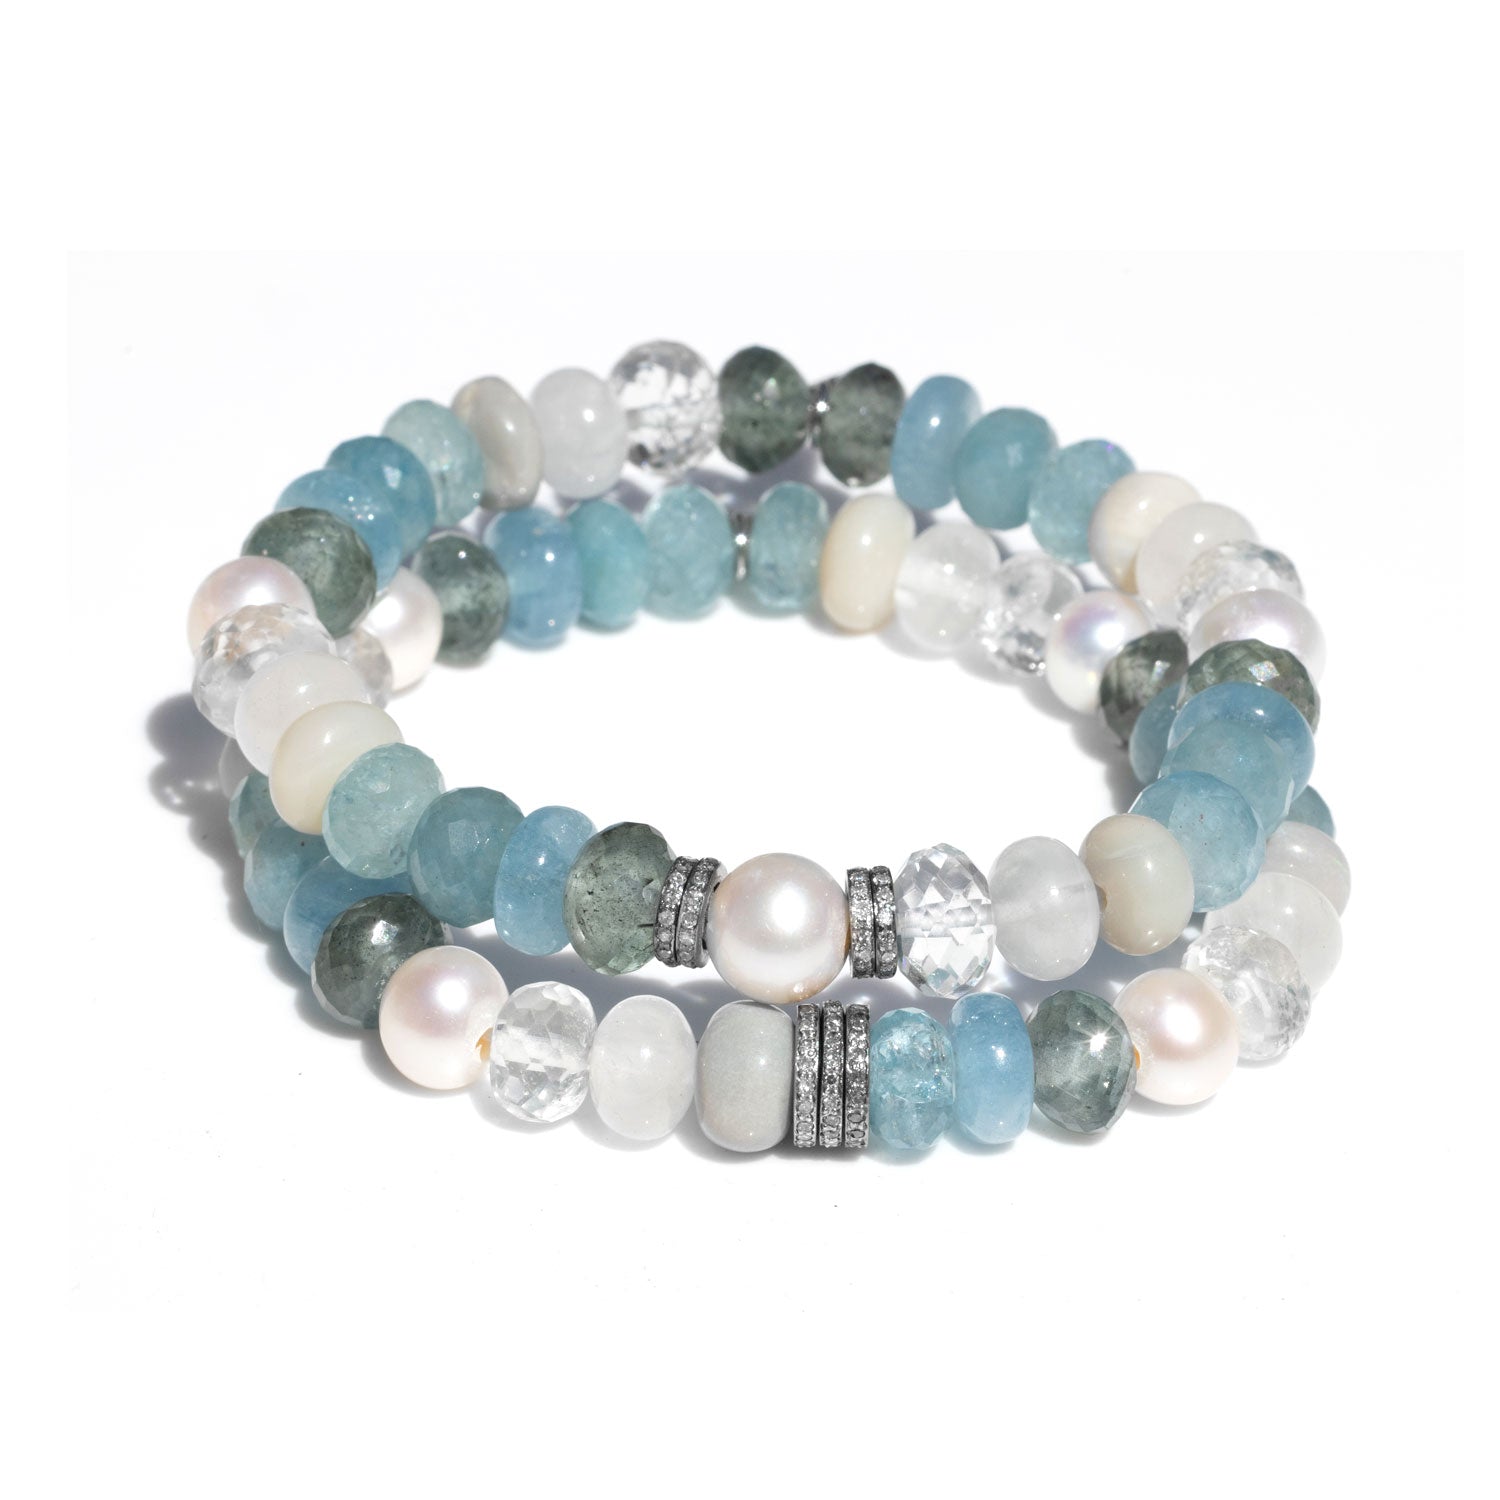 Pearl and Blue Gemstone Mix Bracelet with 4 Diamond Rondelles - 8mm  B0003977 - TBird